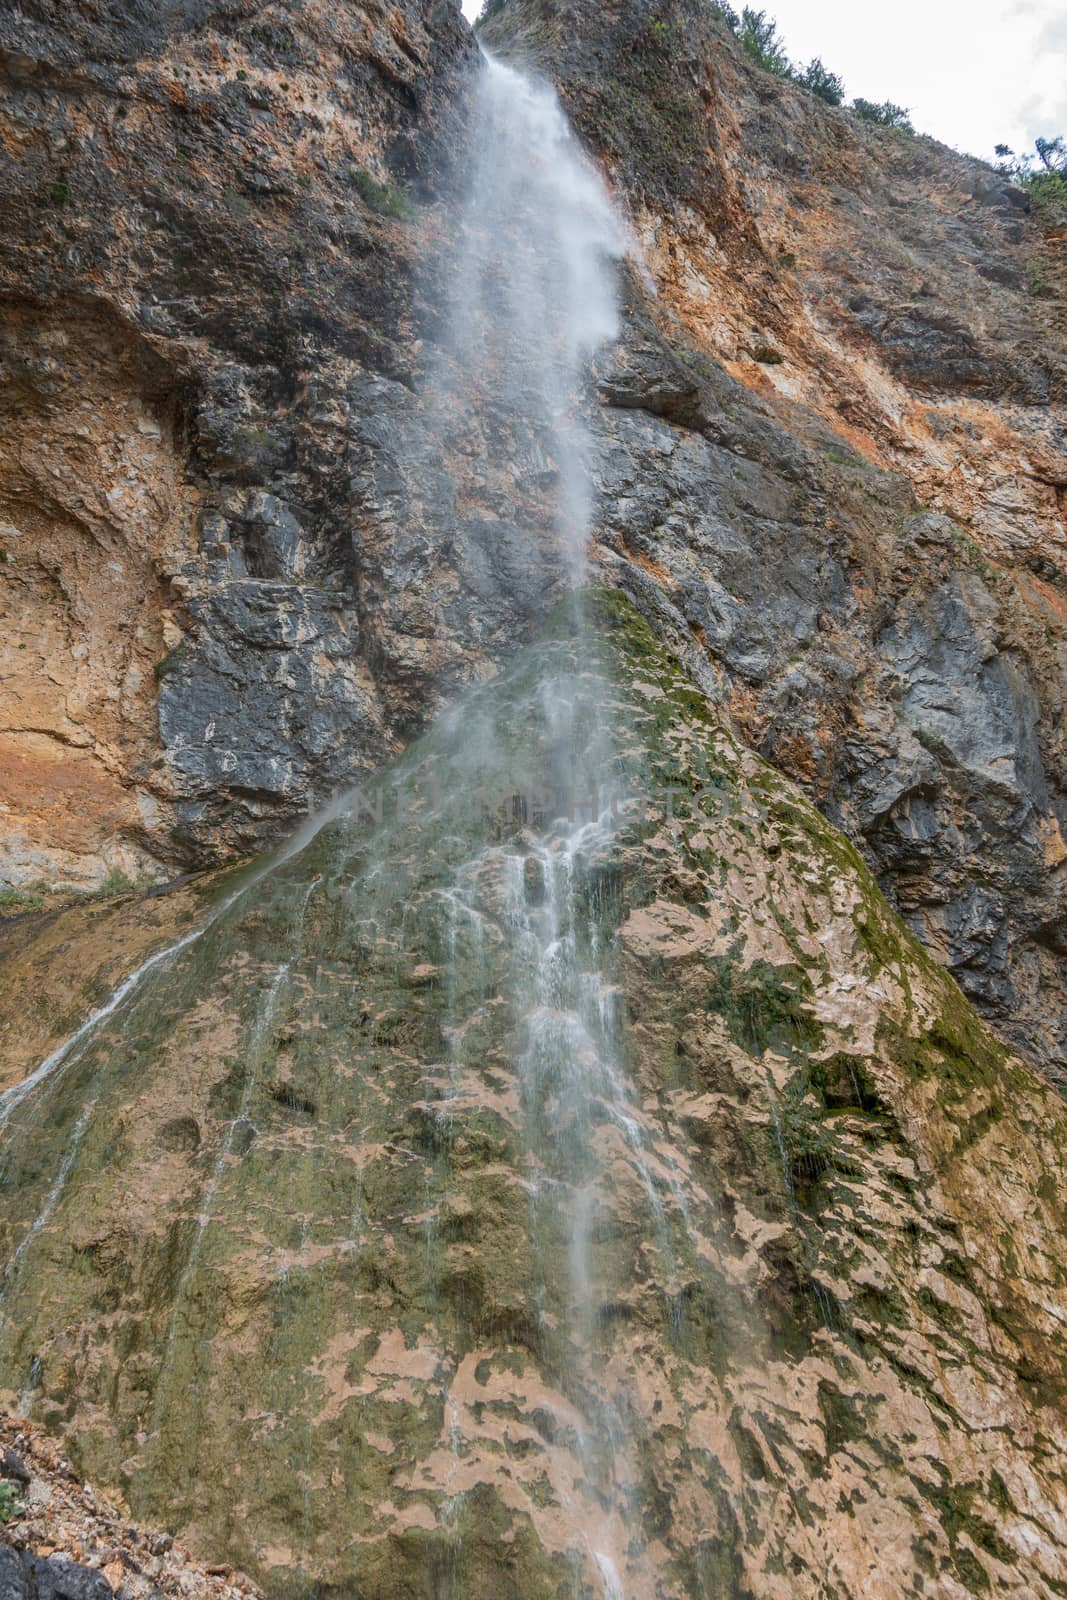 Rinka waterfall in beautiful Alpine valley, Logarska dolina - Logar valley in Slovenia. It's a popular tourist hiking destination in pristine nature surrounded by mountains